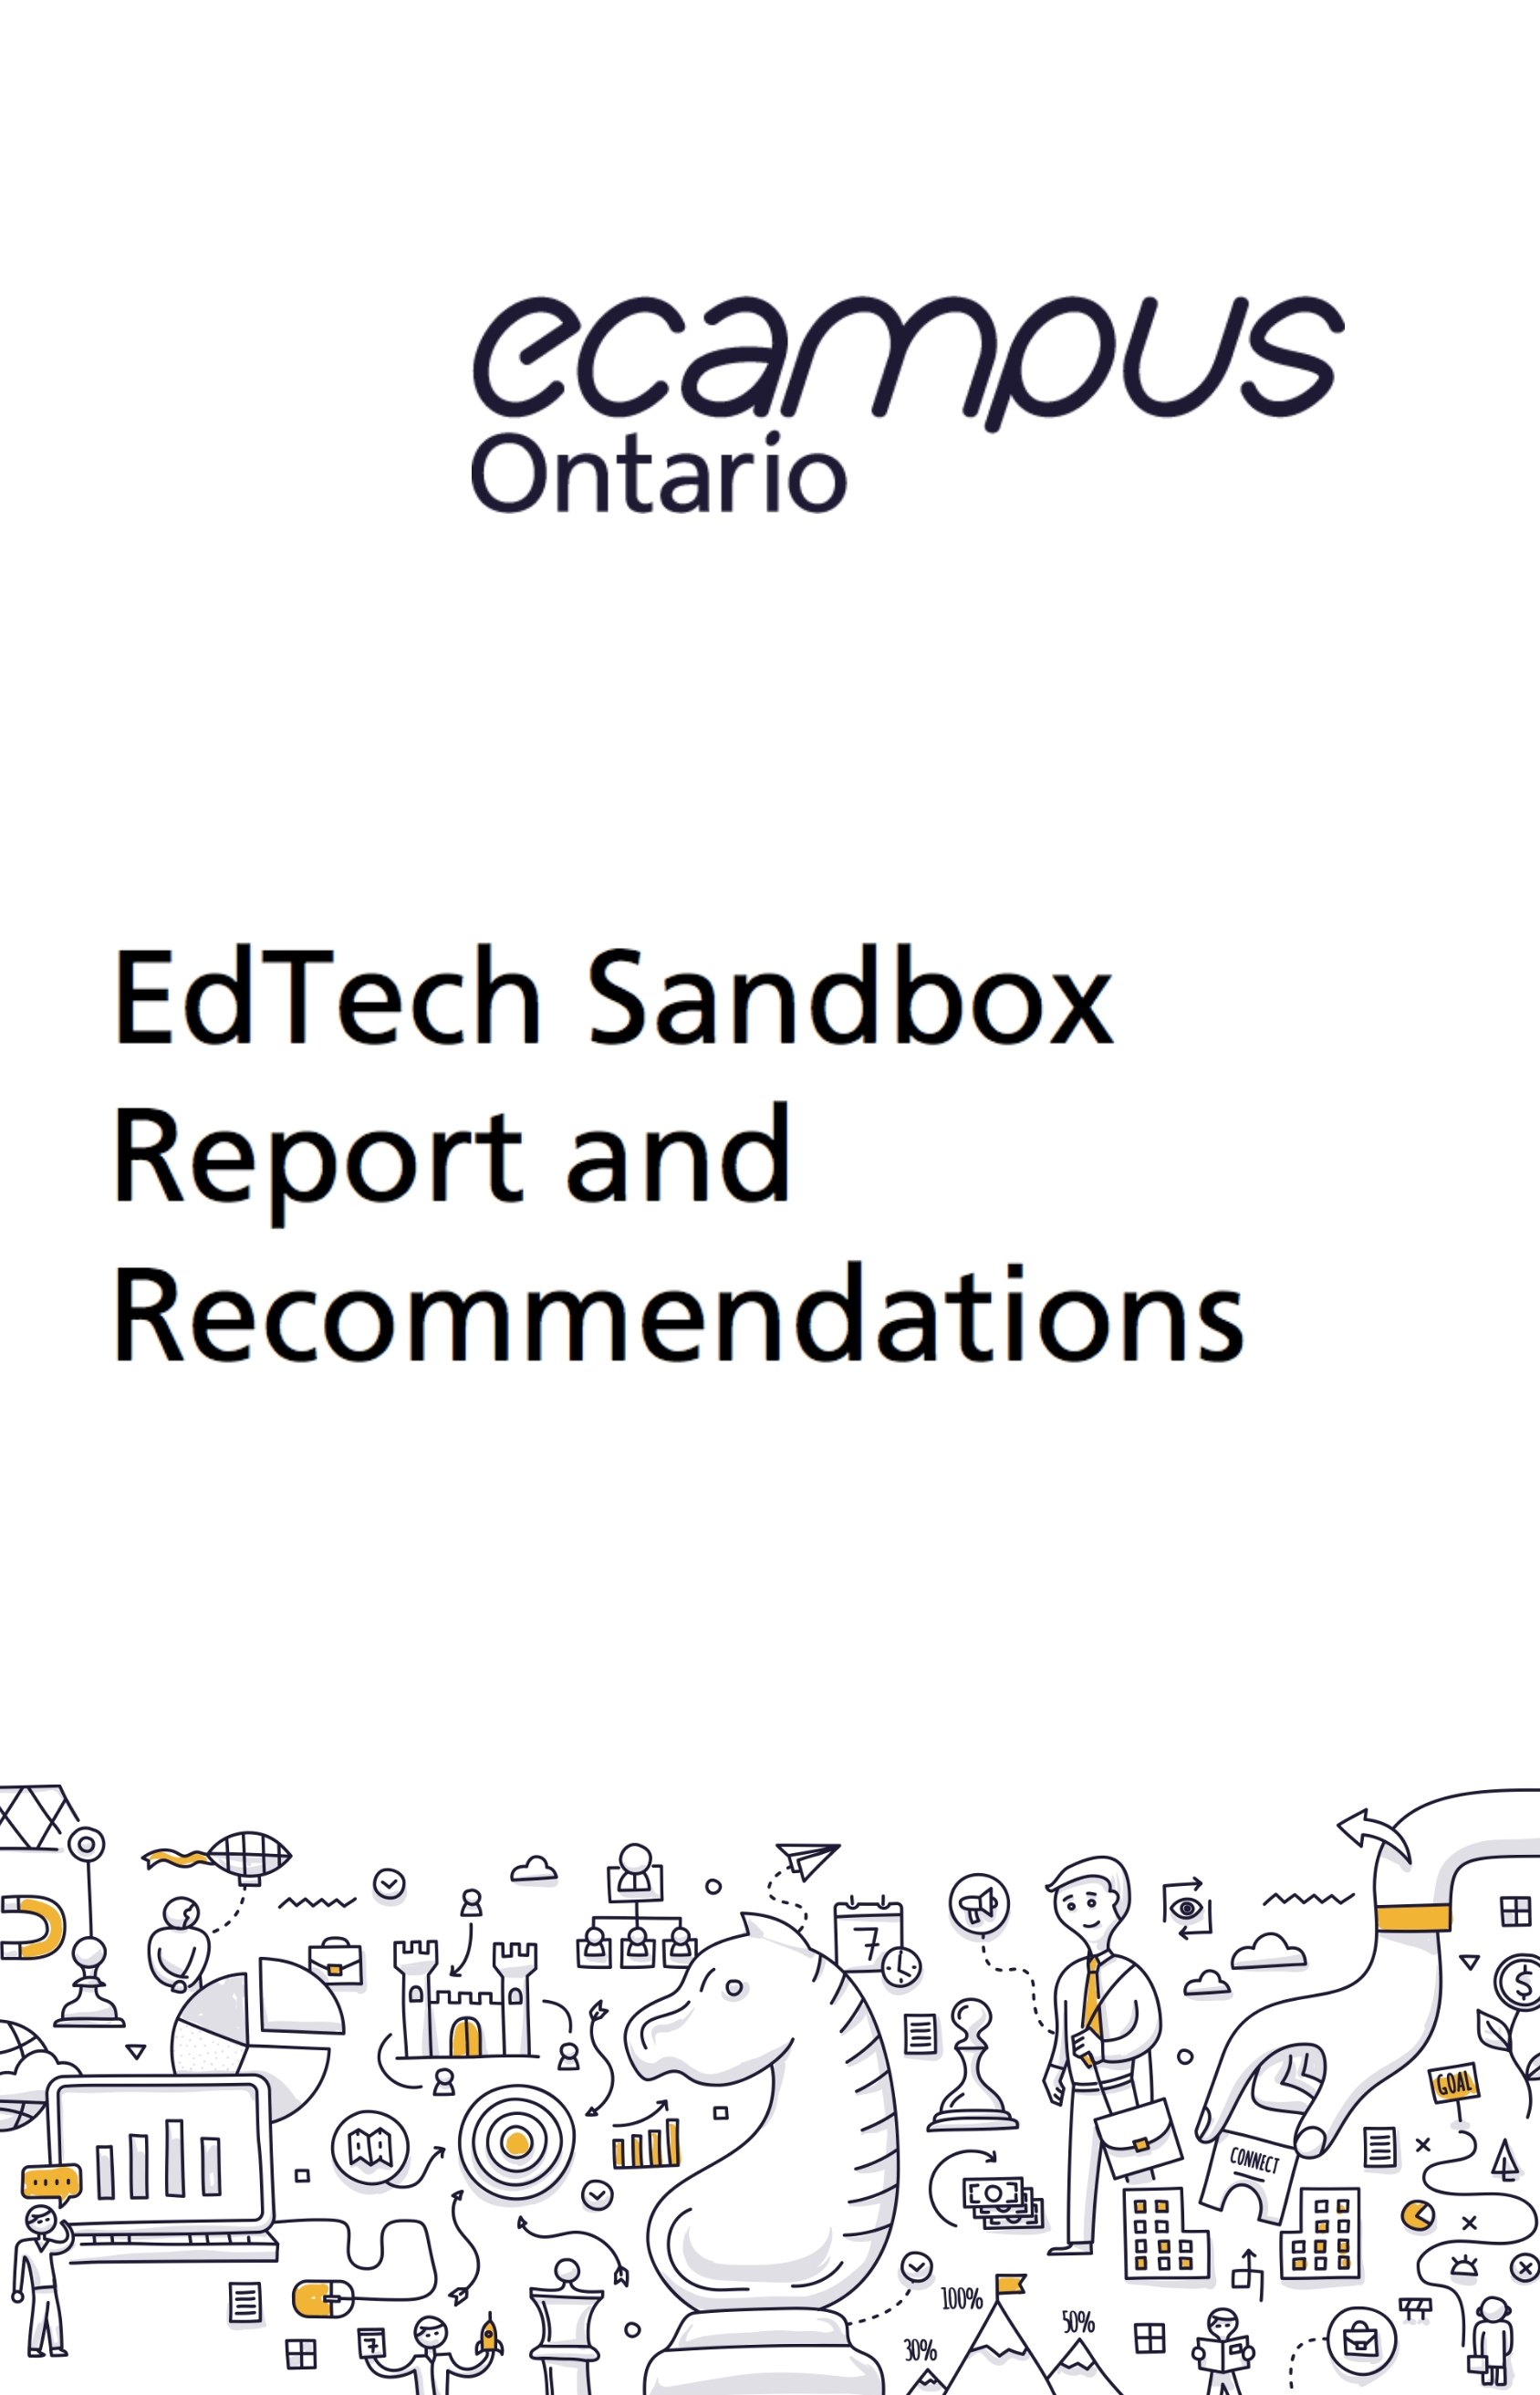 Cover image for eCampusOntario Educational Technology Sandboxes: Reports and Recommendations